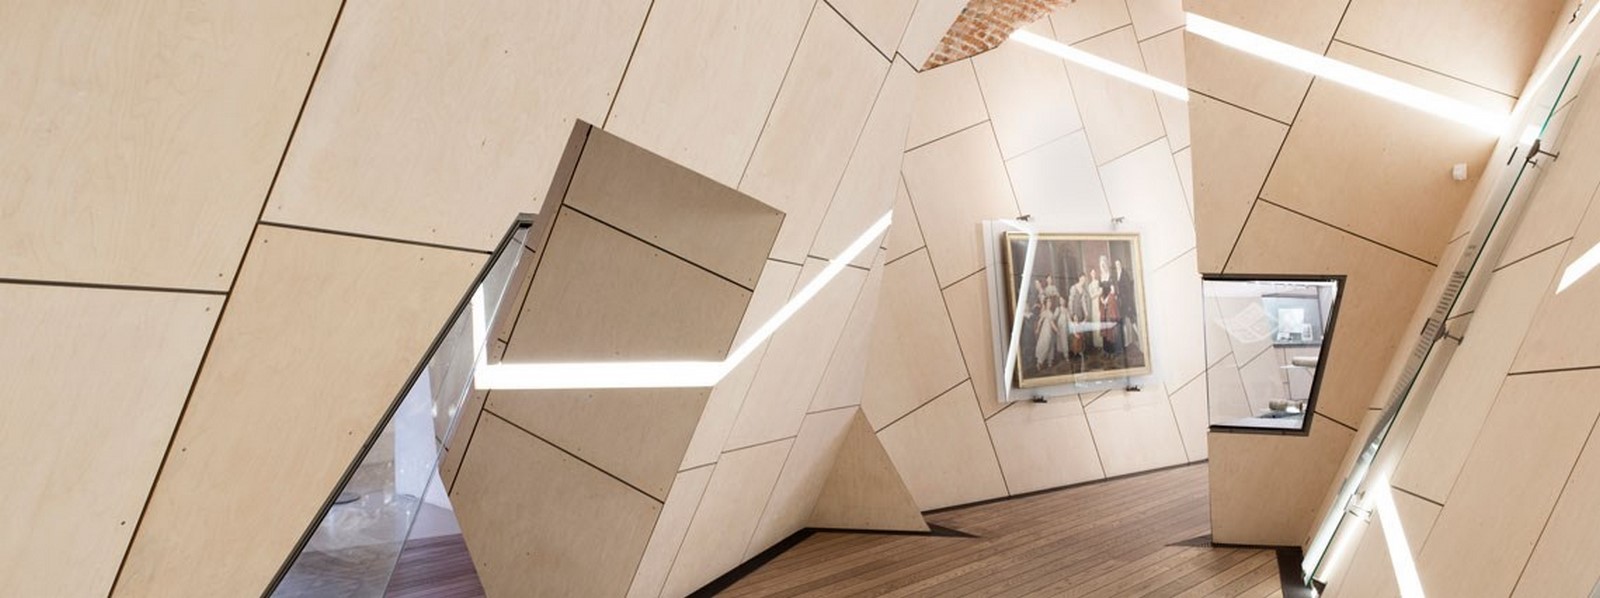 Danish Jewish Museum by Daniel Libeskind: Abright and Lighthearted Space - Sheet7